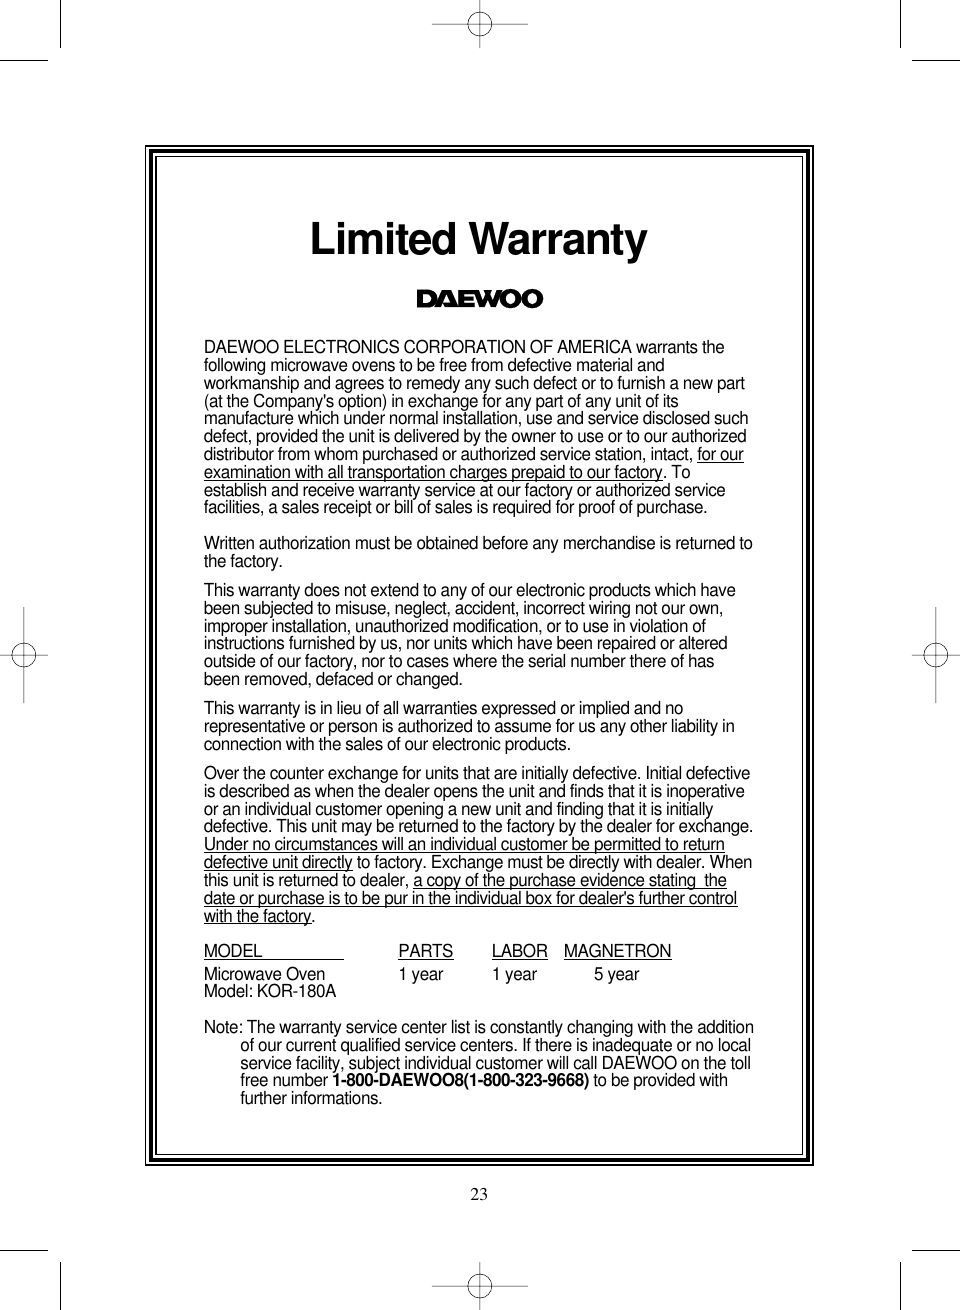 23Limited WarrantyDAEWOO ELECTRONICS CORPORATION OF AMERICA warrants thefollowing microwave ovens to be free from defective material andworkmanship and agrees to remedy any such defect or to furnish a new part(at the Company&apos;s option) in exchange for any part of any unit of itsmanufacture which under normal installation, use and service disclosed suchdefect, provided the unit is delivered by the owner to use or to our authorizeddistributor from whom purchased or authorized service station, intact, for ourexamination with all transportation charges prepaid to our factory. Toestablish and receive warranty service at our factory or authorized servicefacilities, a sales receipt or bill of sales is required for proof of purchase.Written authorization must be obtained before any merchandise is returned tothe factory.This warranty does not extend to any of our electronic products which havebeen subjected to misuse, neglect, accident, incorrect wiring not our own,improper installation, unauthorized modification, or to use in violation ofinstructions furnished by us, nor units which have been repaired or alteredoutside of our factory, nor to cases where the serial number there of hasbeen removed, defaced or changed.This warranty is in lieu of all warranties expressed or implied and norepresentative or person is authorized to assume for us any other liability inconnection with the sales of our electronic products.Over the counter exchange for units that are initially defective. Initial defectiveis described as when the dealer opens the unit and finds that it is inoperativeor an individual customer opening a new unit and finding that it is initiallydefective. This unit may be returned to the factory by the dealer for exchange.Under no circumstances will an individual customer be permitted to returndefective unit directly to factory. Exchange must be directly with dealer. Whenthis unit is returned to dealer, a copy of the purchase evidence stating  thedate or purchase is to be pur in the individual box for dealer&apos;s further controlwith the factory.MODEL                    PARTS LABOR MAGNETRONMicrowave Oven 1 year 1 year 5 yearModel: KOR-180ANote: The warranty service center list is constantly changing with the additionof our current qualified service centers. If there is inadequate or no localservice facility, subject individual customer will call DAEWOO on the tollfree number 1-800-DAEWOO8(1-800-323-9668) to be provided withfurther informations. 